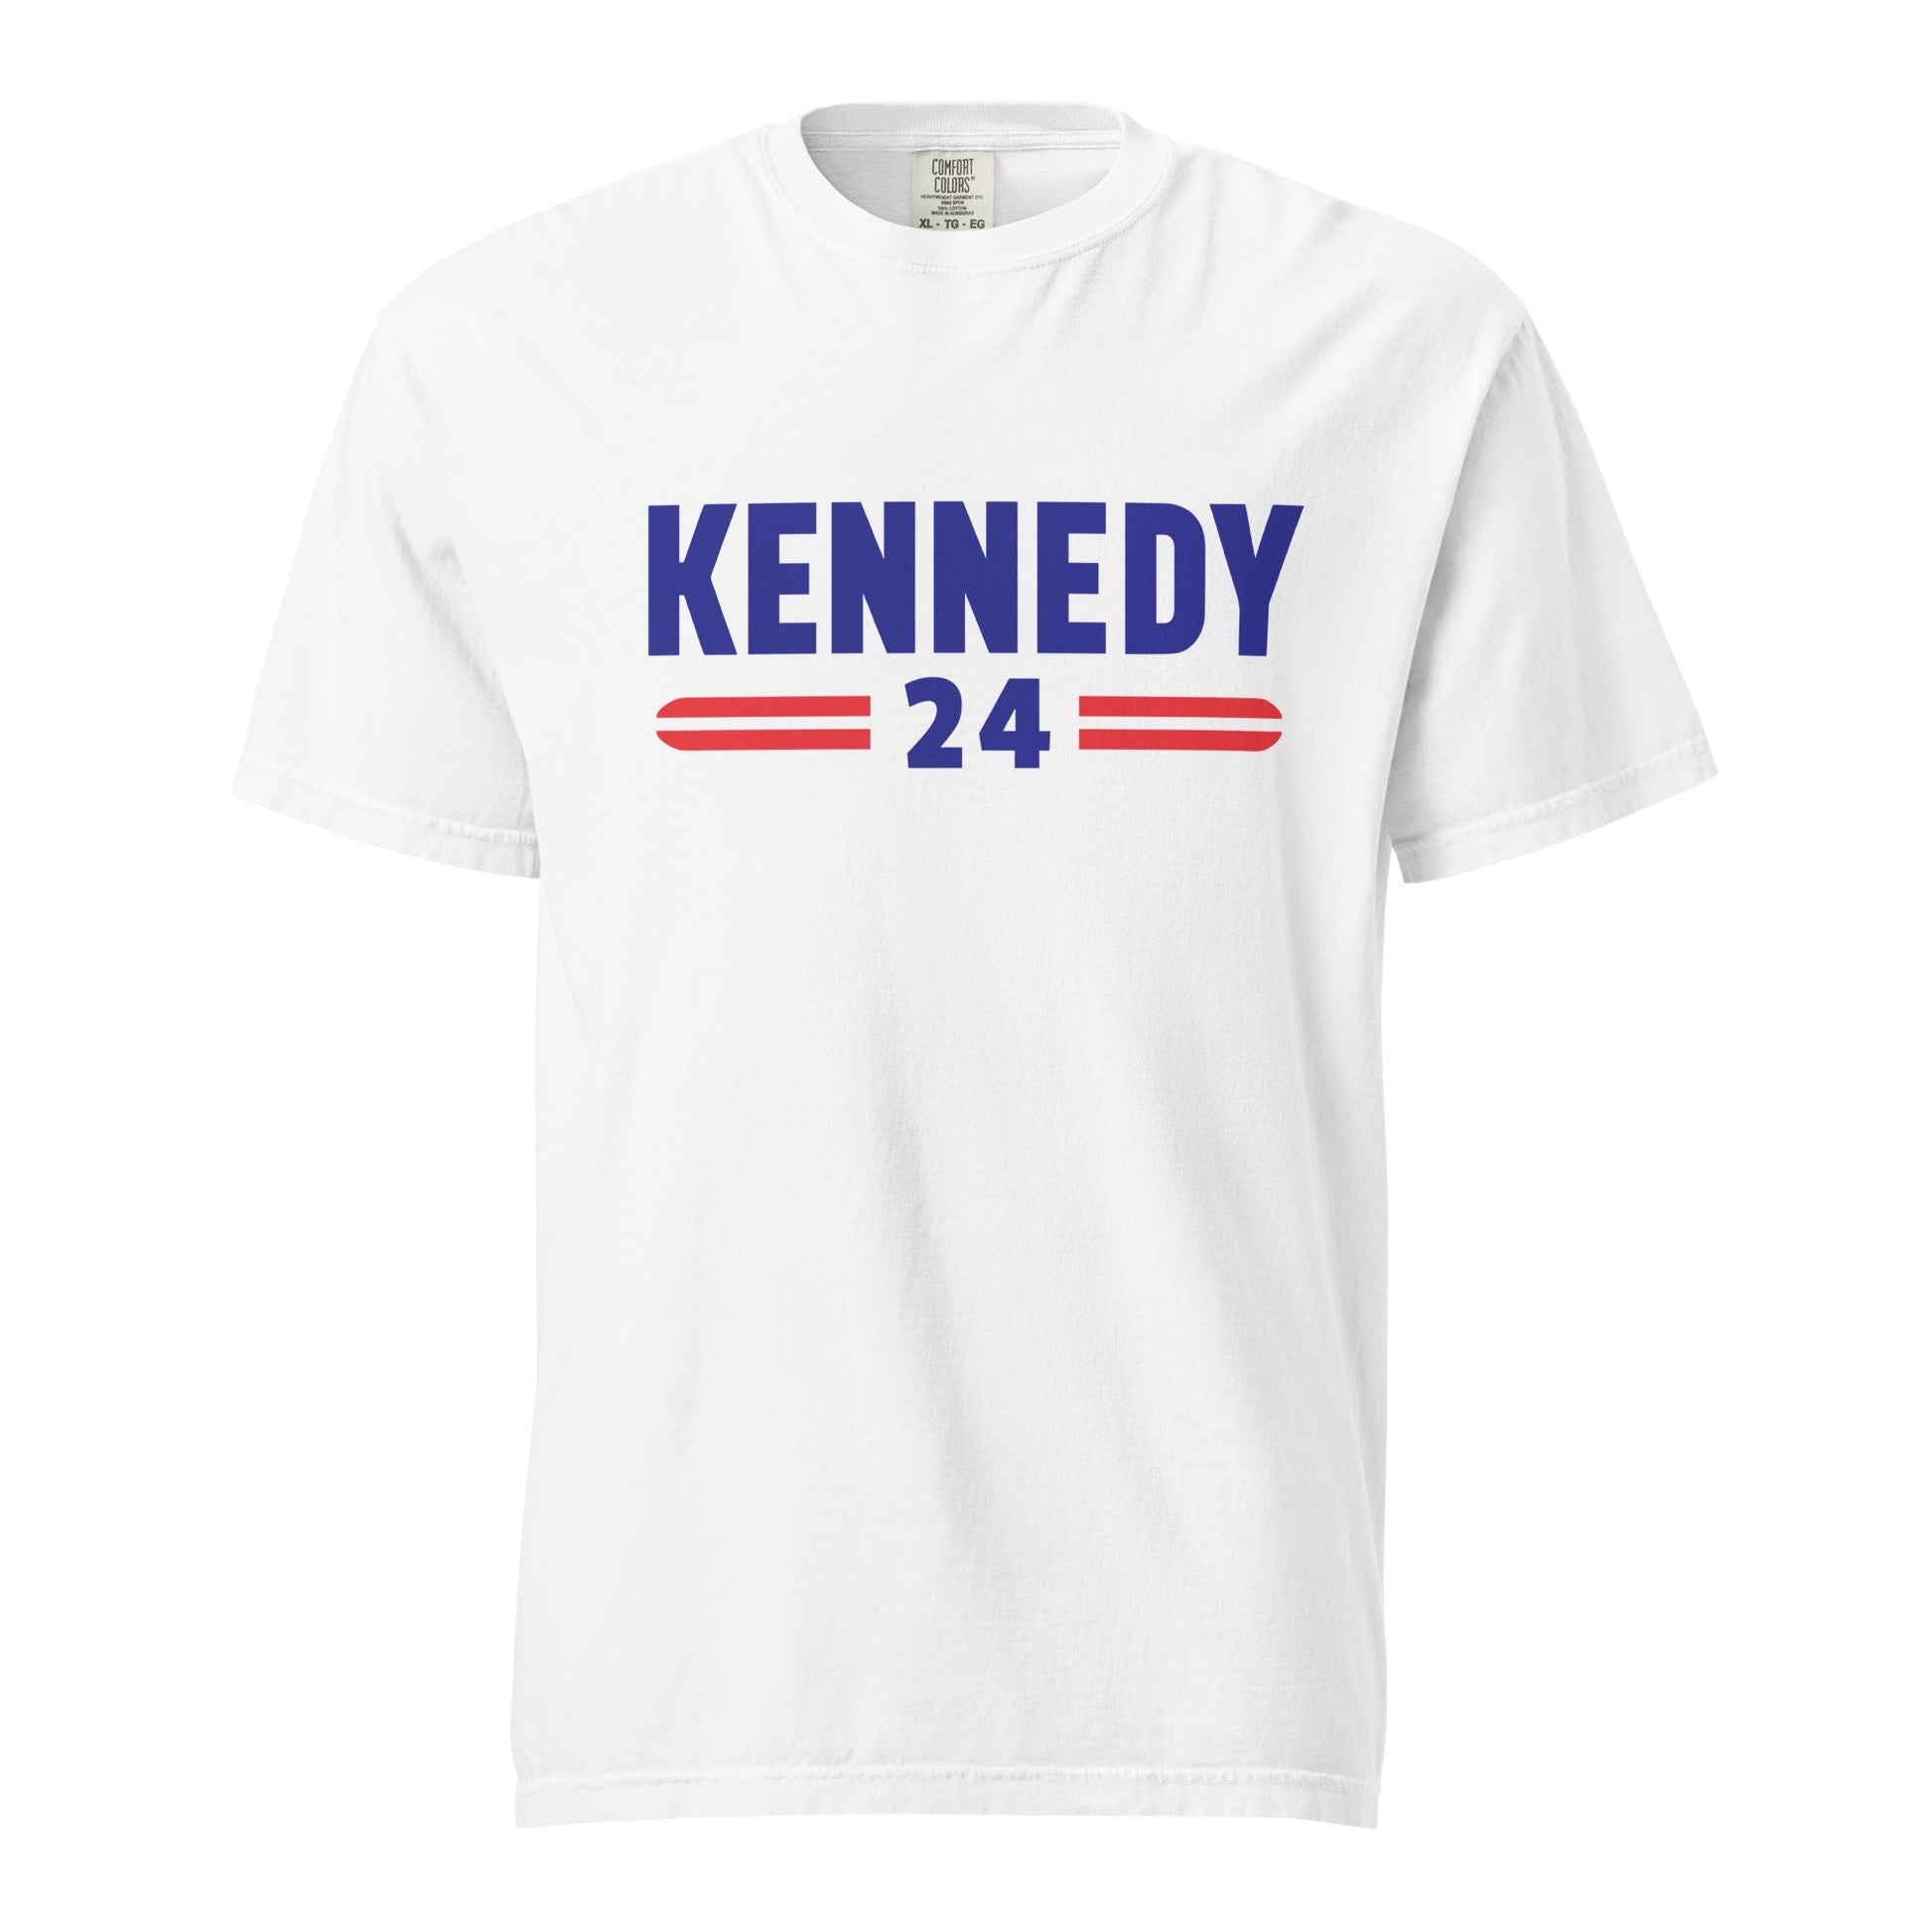 Kennedy Classic Tee - TEAM KENNEDY. All rights reserved